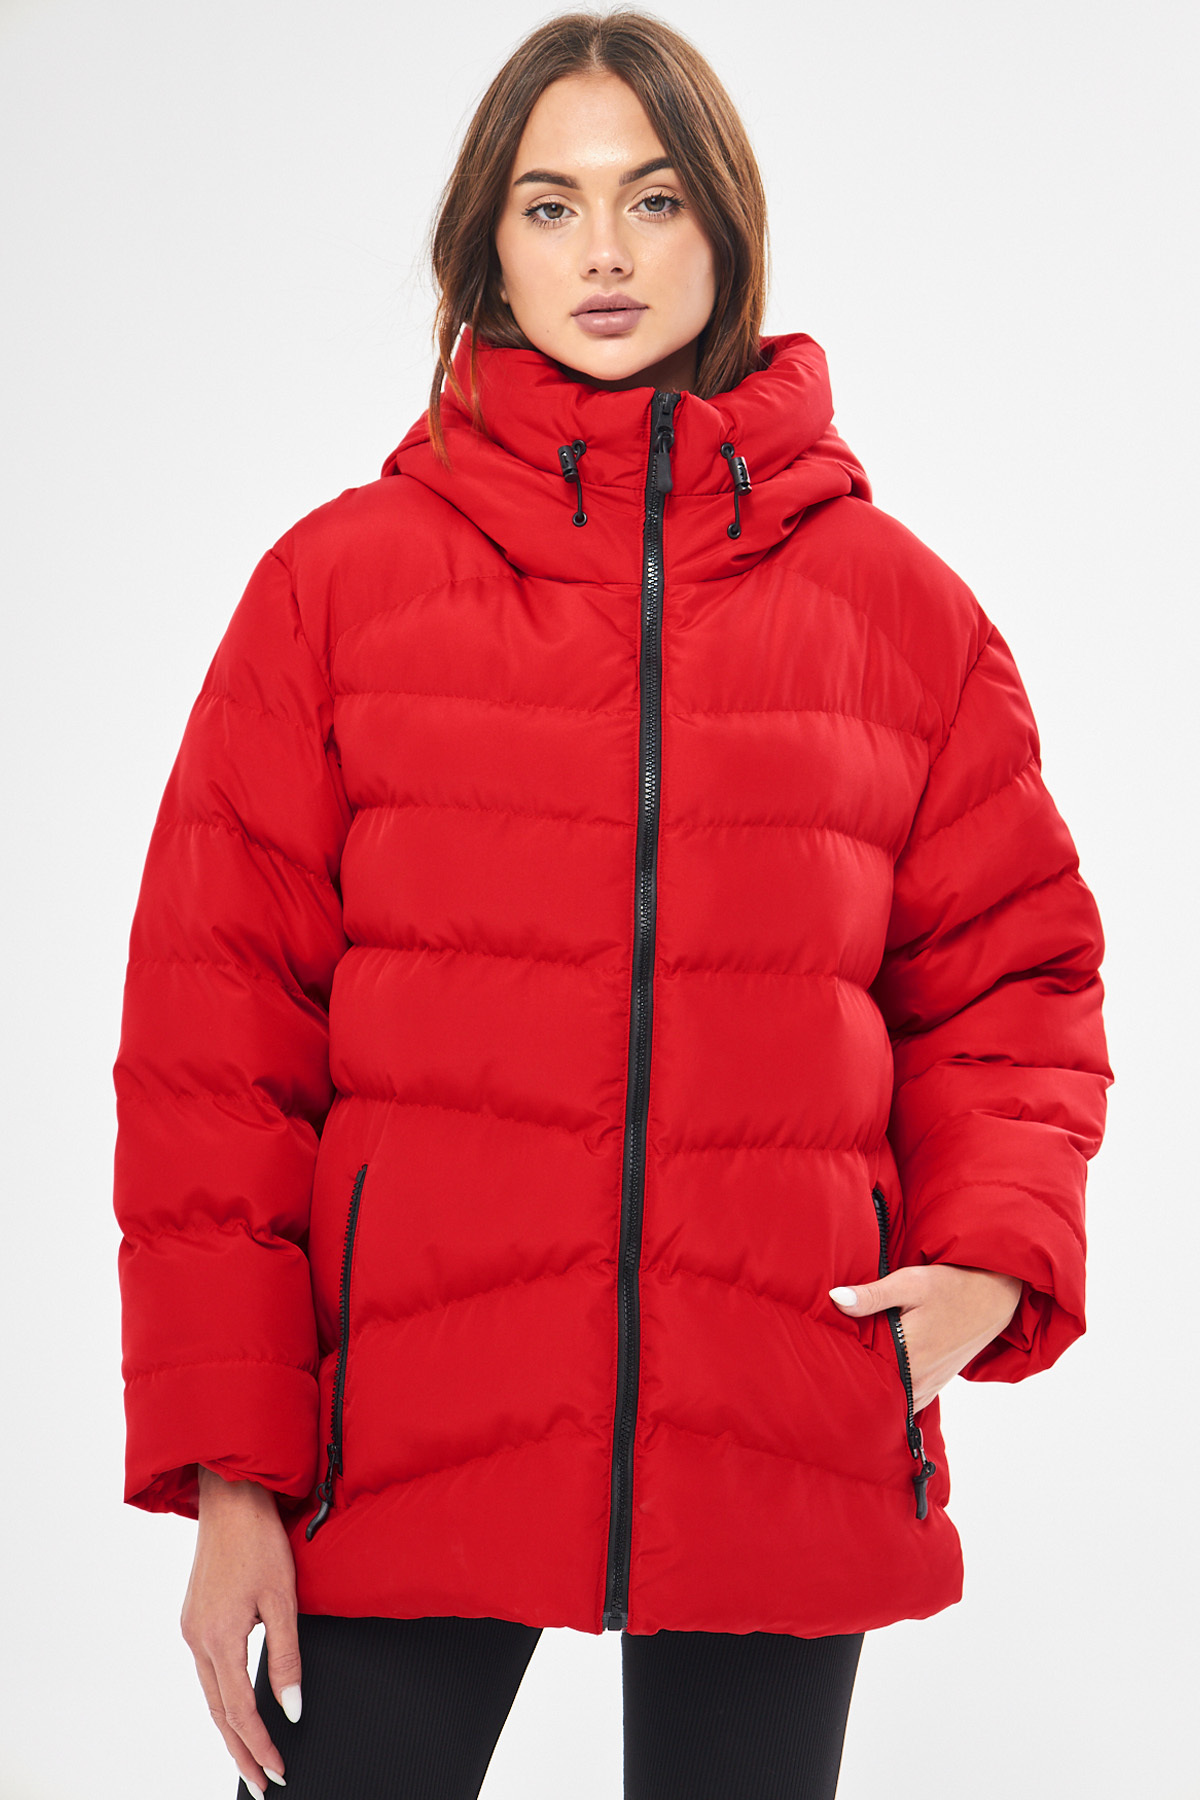 D1fference Women's Red Hooded Water And Windproof Puffer Winter Coat